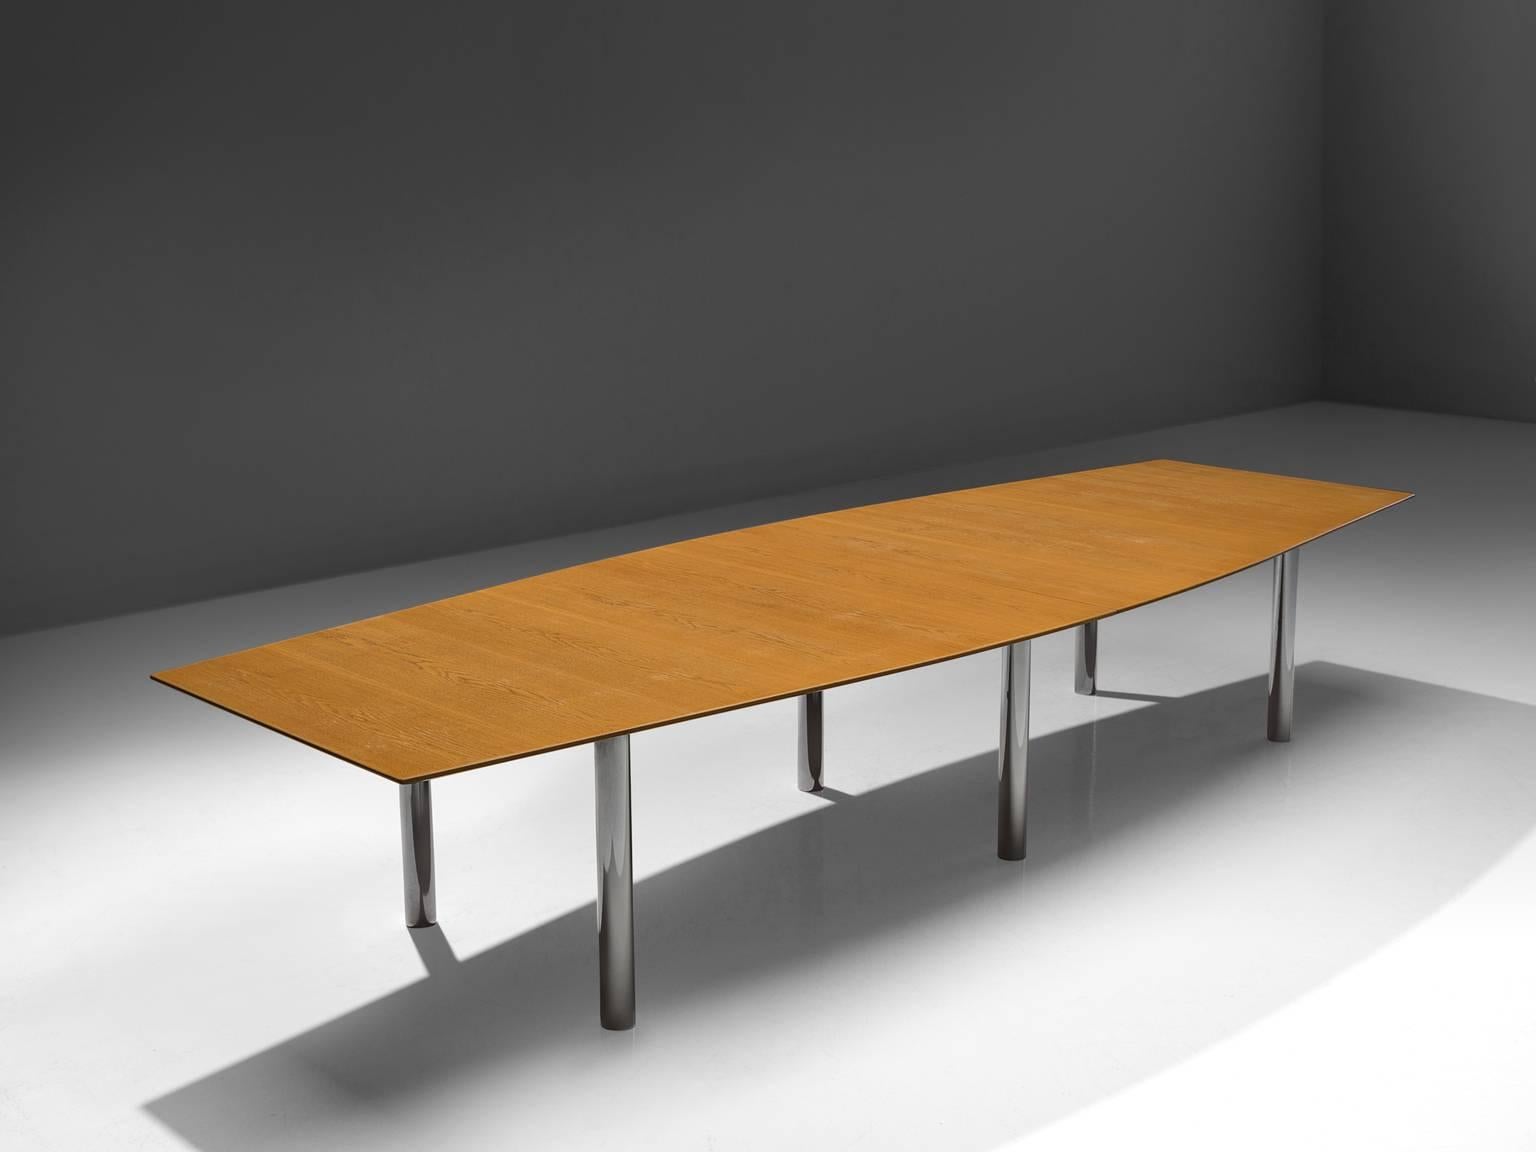 Knoll International, conference table, steel and beech, United States, 1960s

This large boat or barrel shaped table is designed in a modernist, simplistic style. There is no unnecessary decoration. The table is robust and strong and has six steel